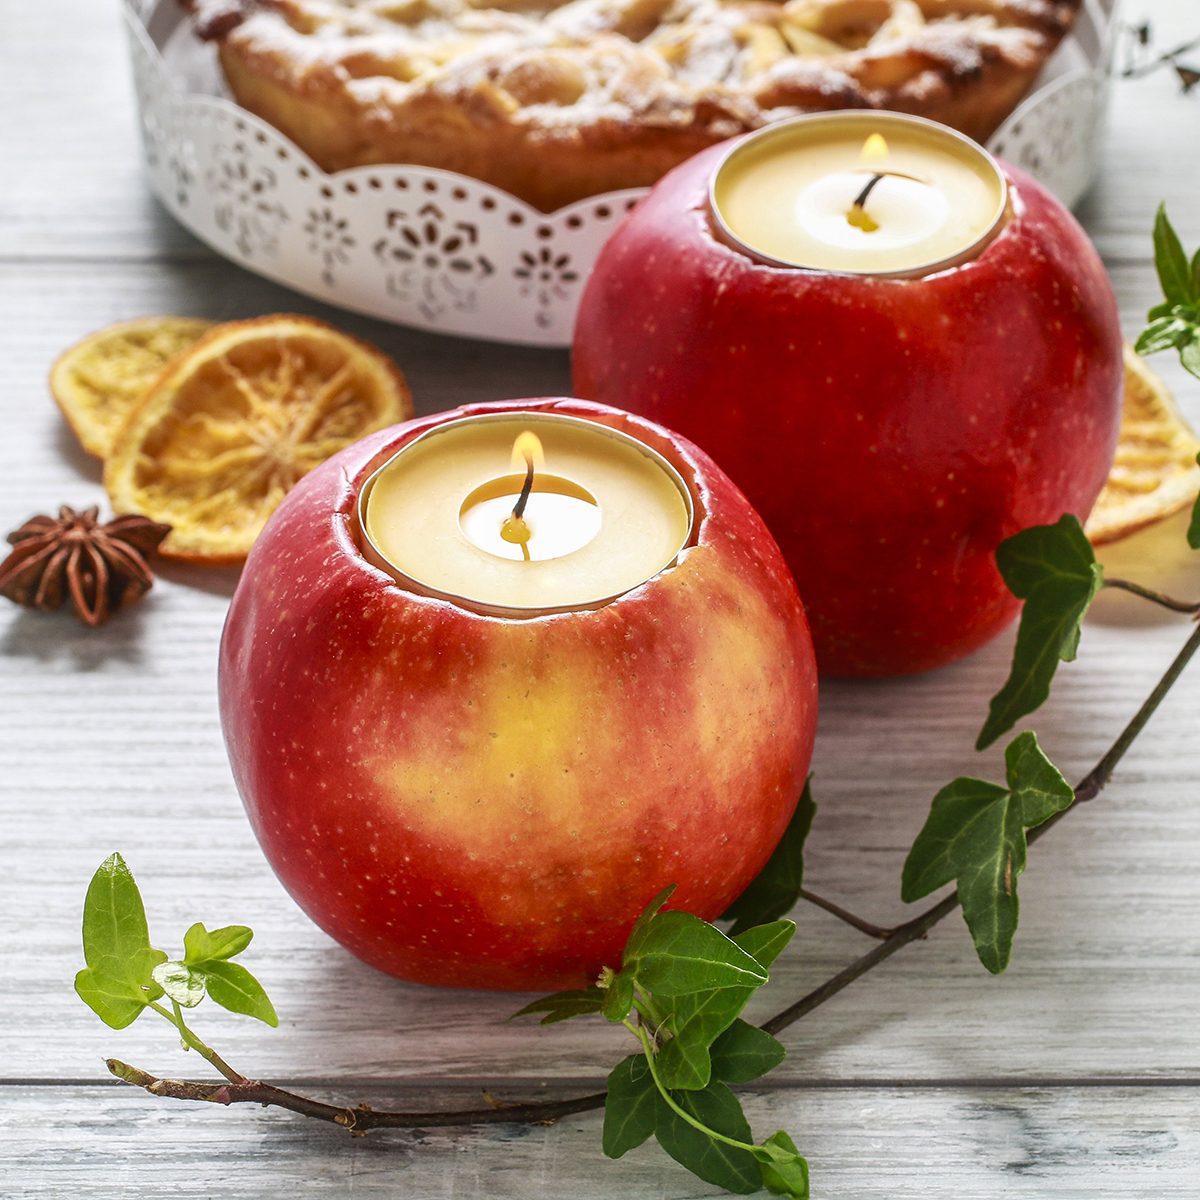 Candle in apple - beautiful table decoration